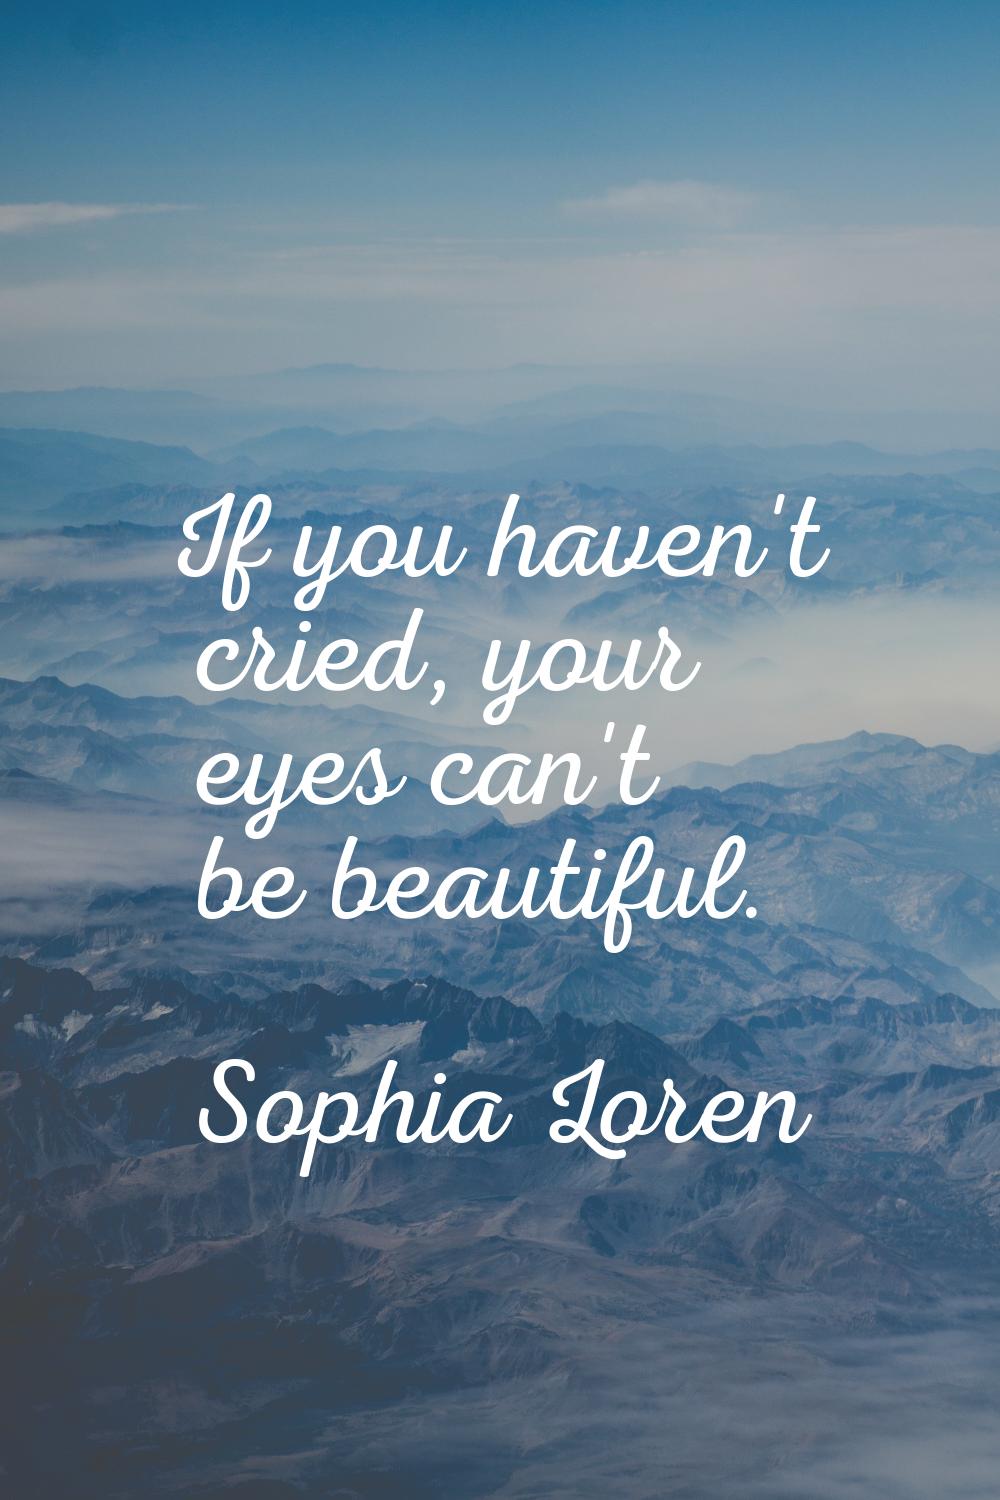 If you haven't cried, your eyes can't be beautiful.